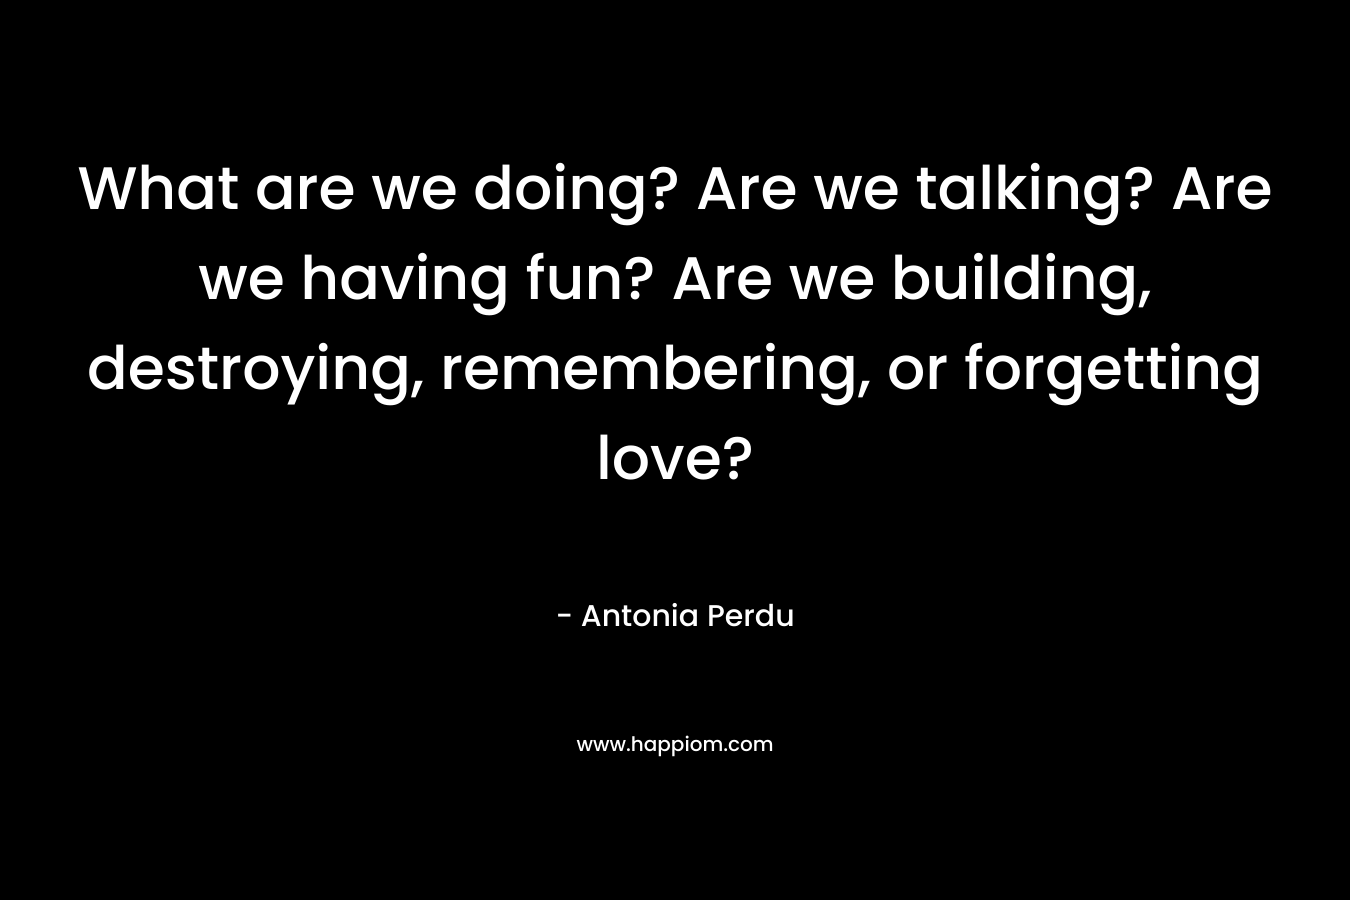 What are we doing? Are we talking? Are we having fun? Are we building, destroying, remembering, or forgetting love? – Antonia Perdu